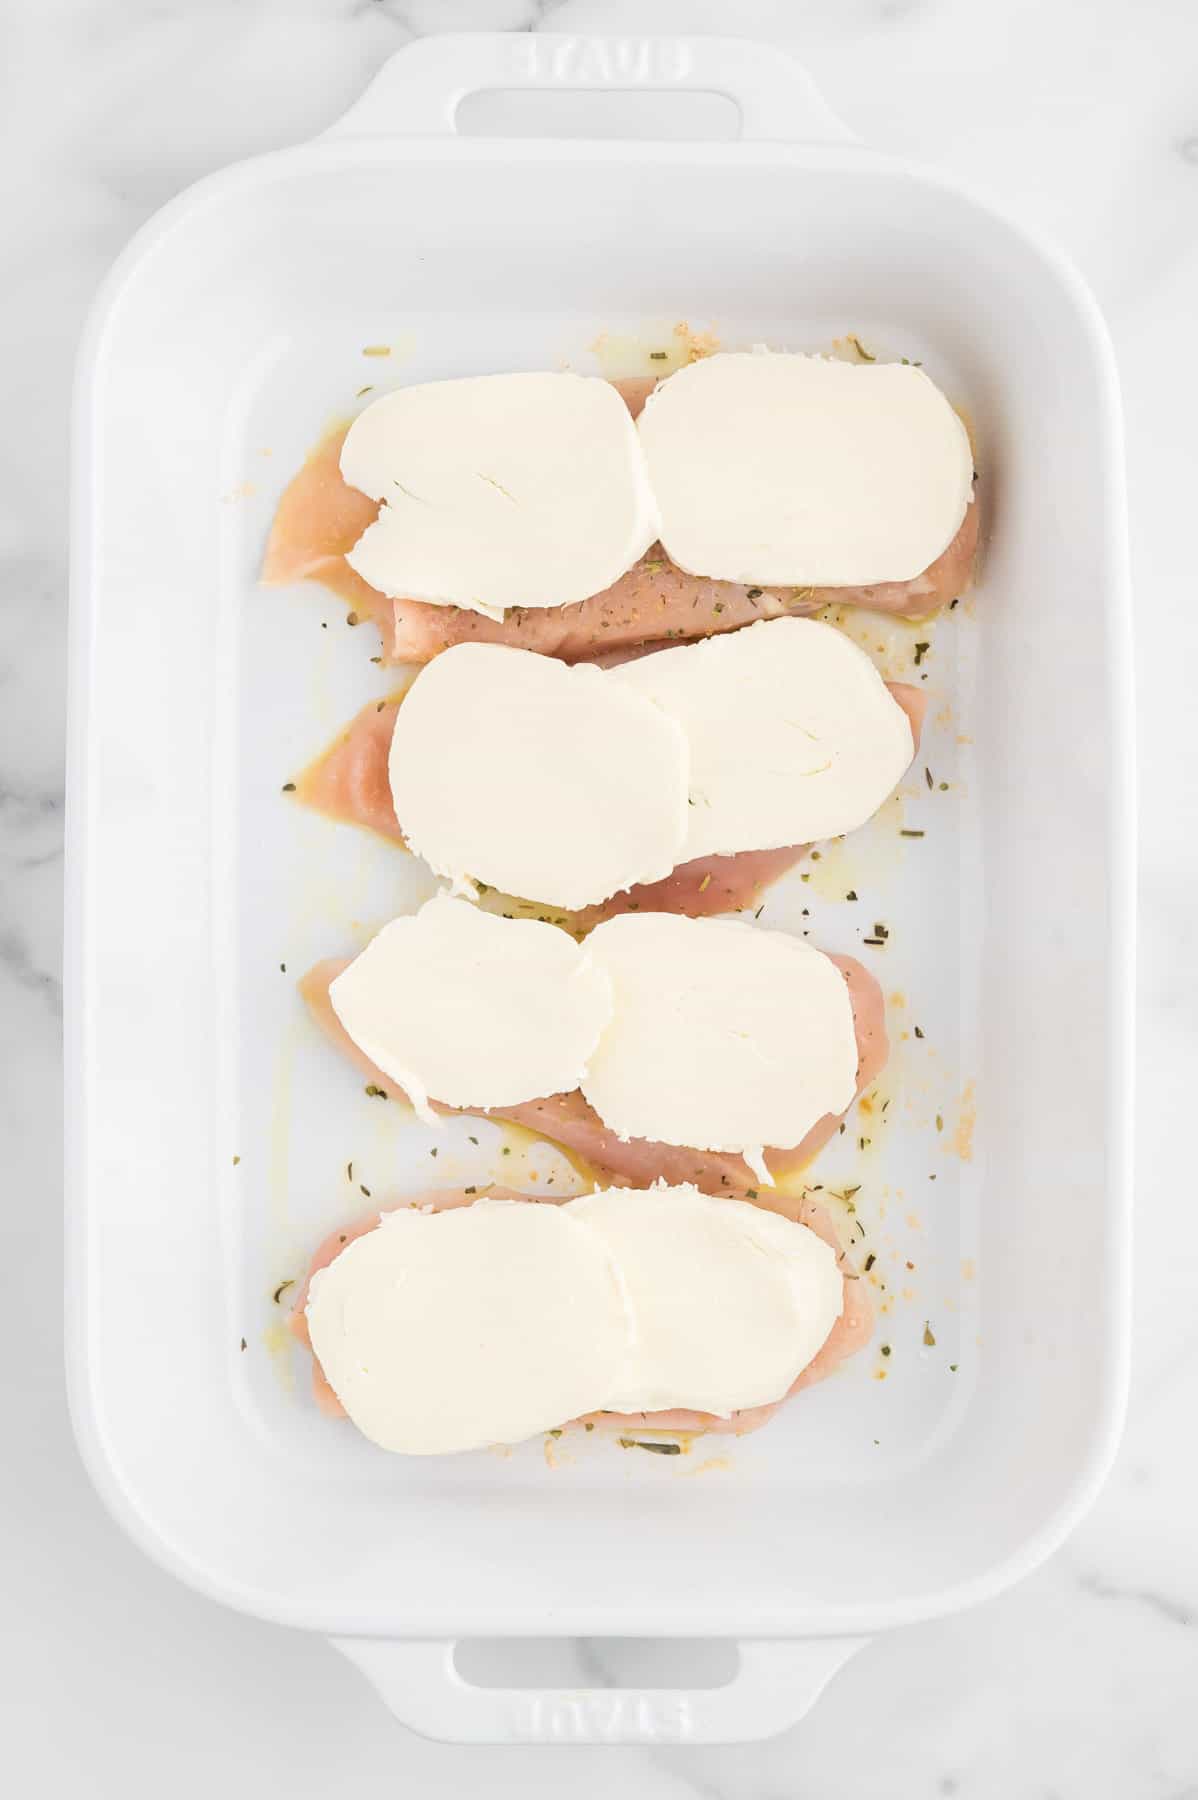 fresh slices of mozzarella on top of chicken breasts in a baking dish